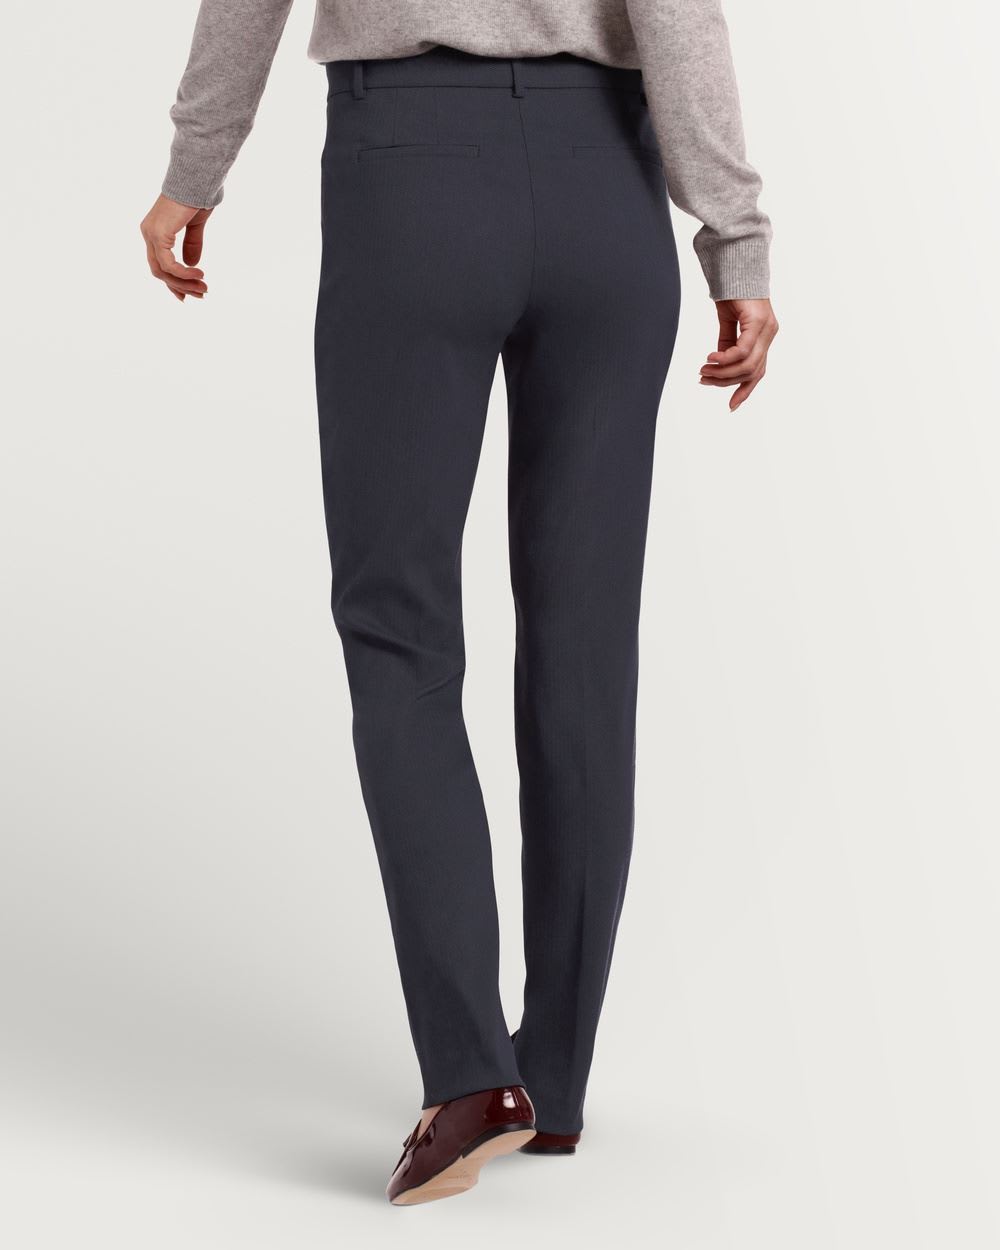 Patterned Straight Leg Pant The Iconic - Petite